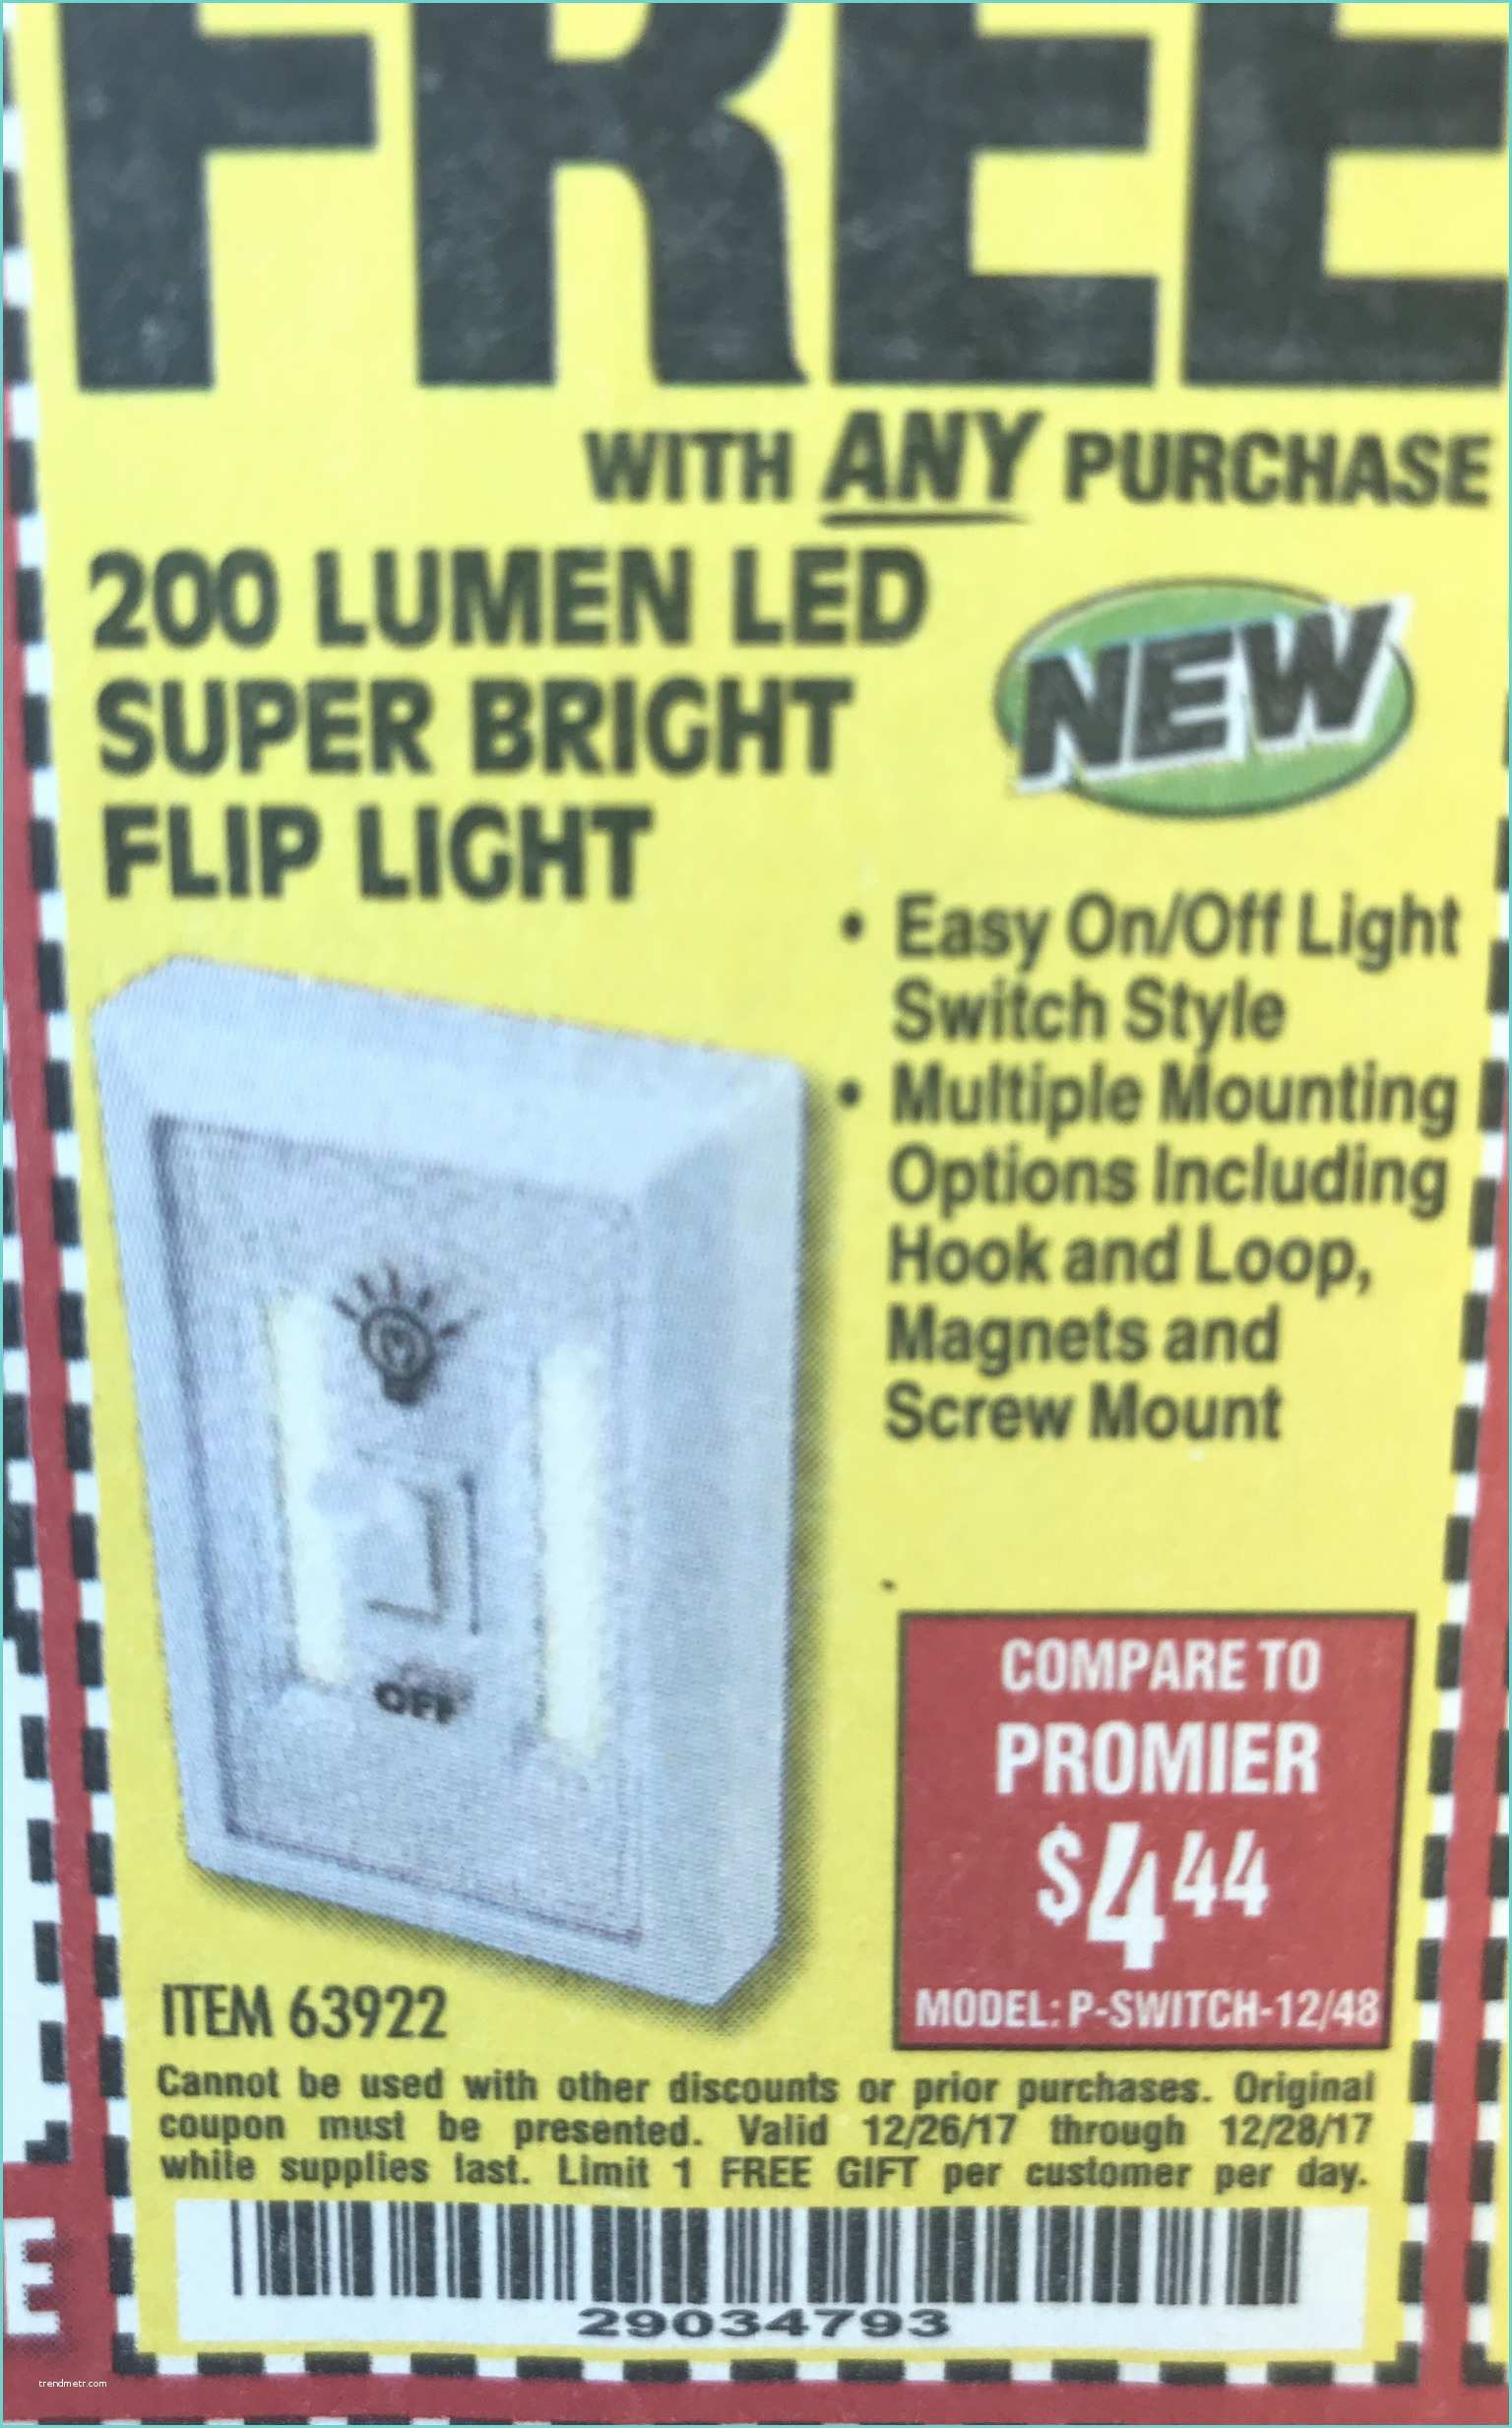 Super Bright Leds Coupon Harbor Freight tools Coupon Database Free Coupons 25